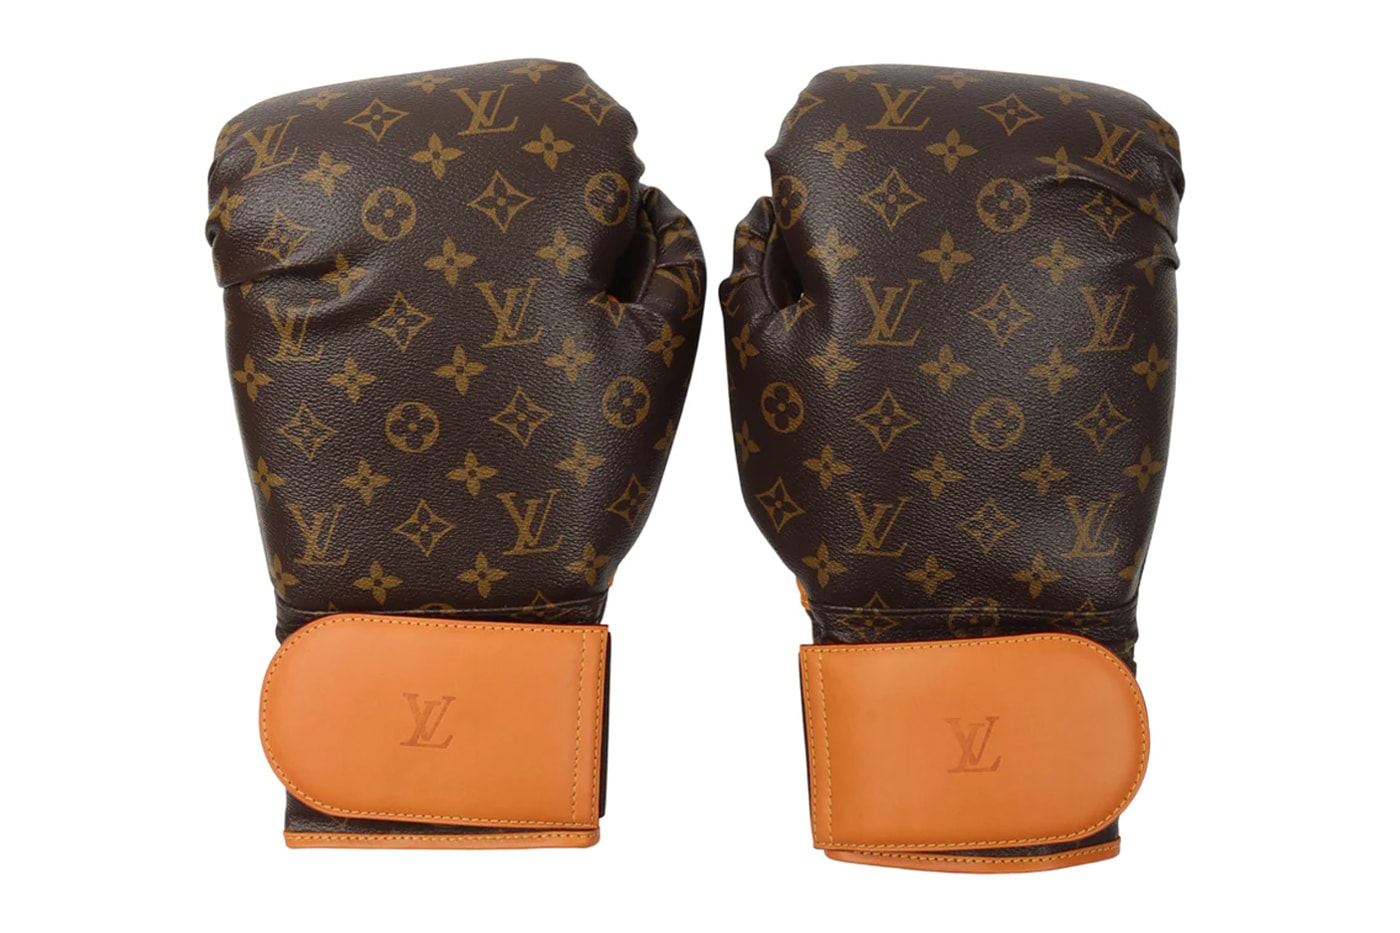 Tradesy Debuts L.A. Showroom With Louis Vuitton Boxing Gloves, D&G  Chandelier Heels and More Rare Fashion